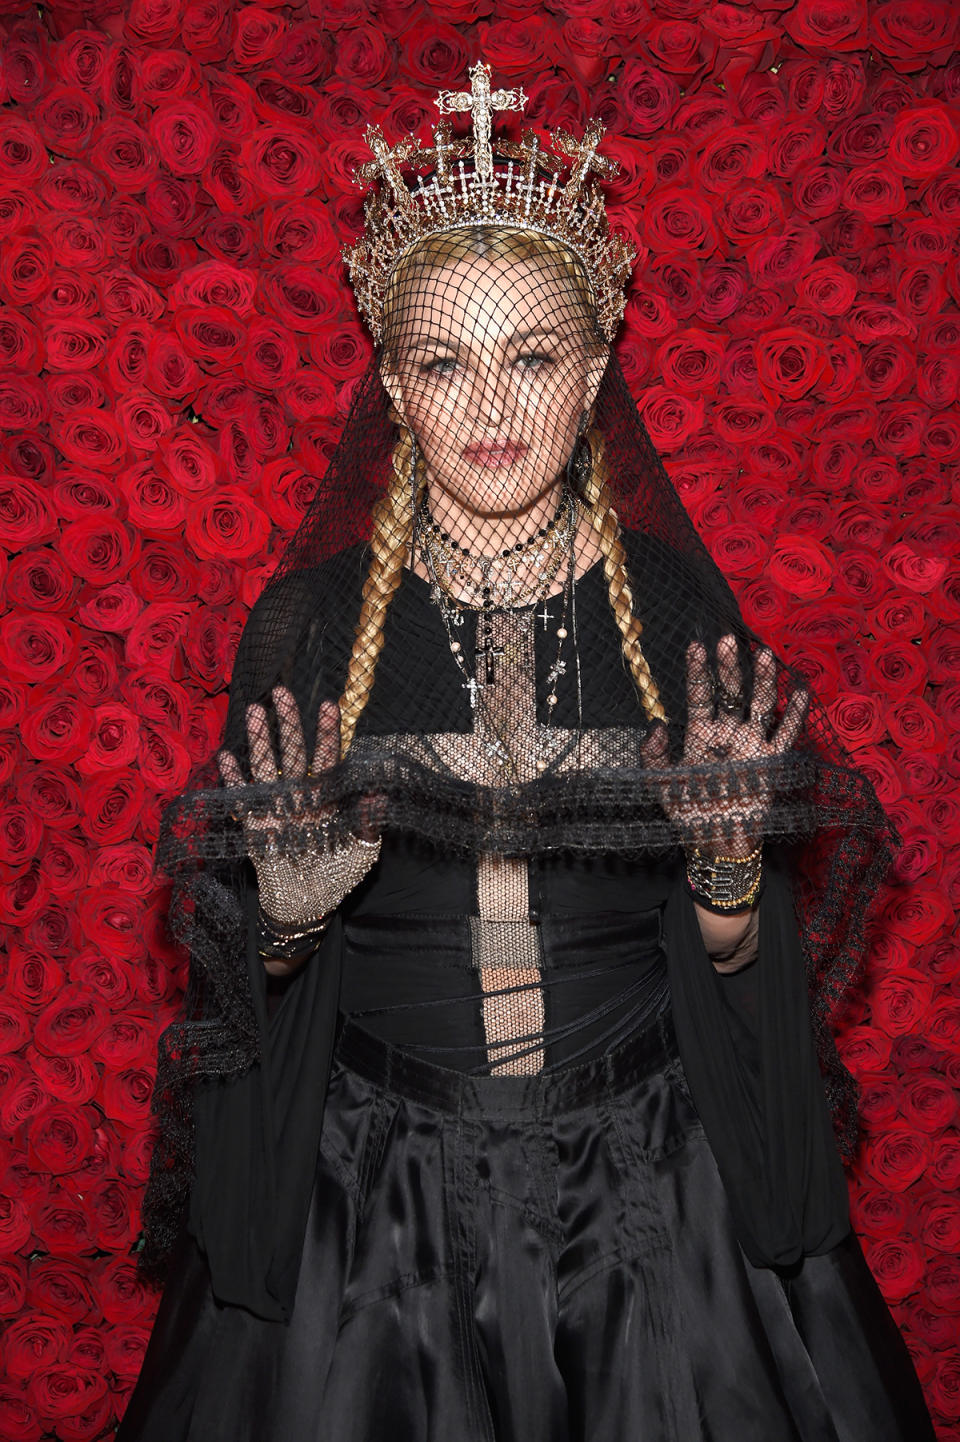 Madonna wears a black robe, lace veil and silver crown at the Heavenly Bodies: Fashion & The Catholic Imagination Costume Institute Gala at The Metropolitan Museum of Art on May 7, 2018 in New York City